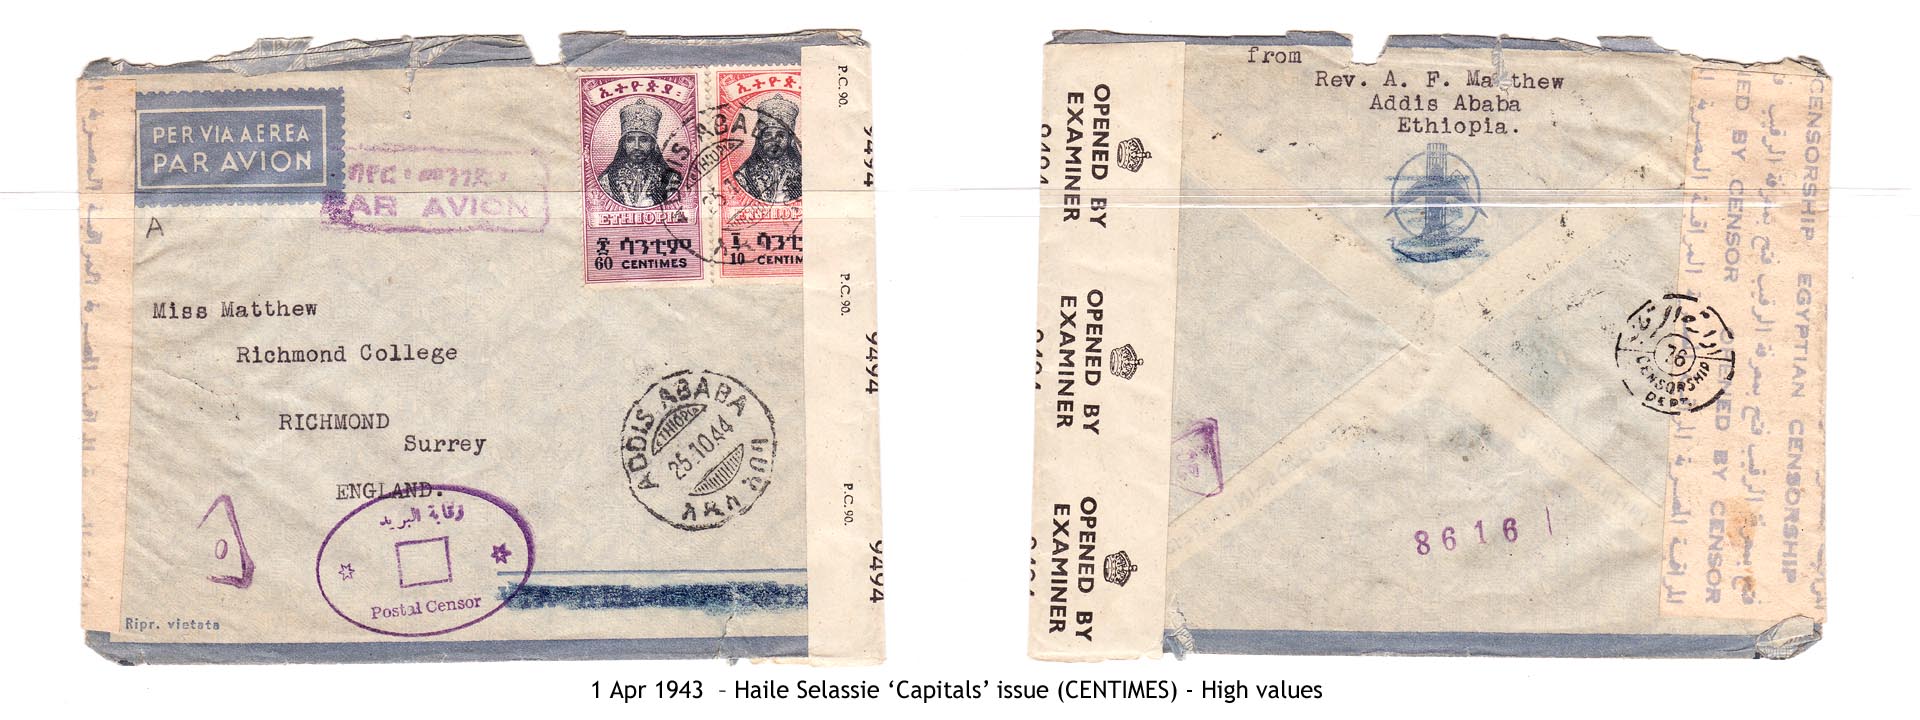 19430401 – Haile Selassie ‘Capitals’ issue (CENTIMES)